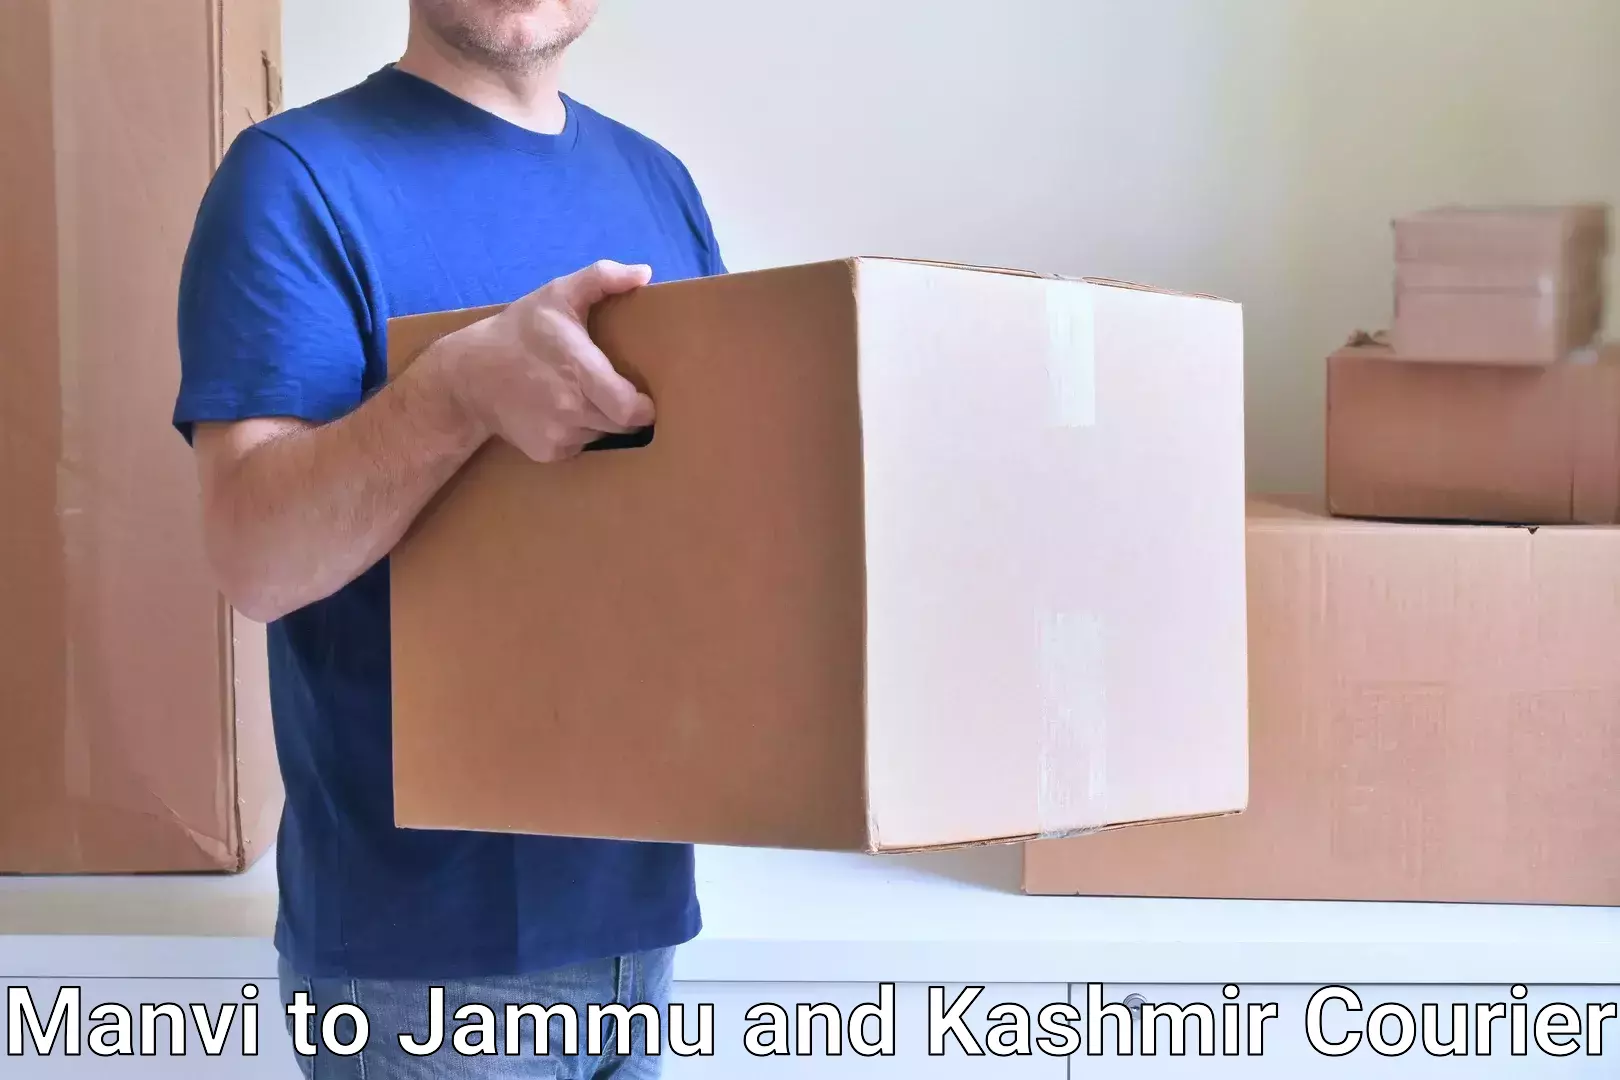 Residential courier service Manvi to Shopian